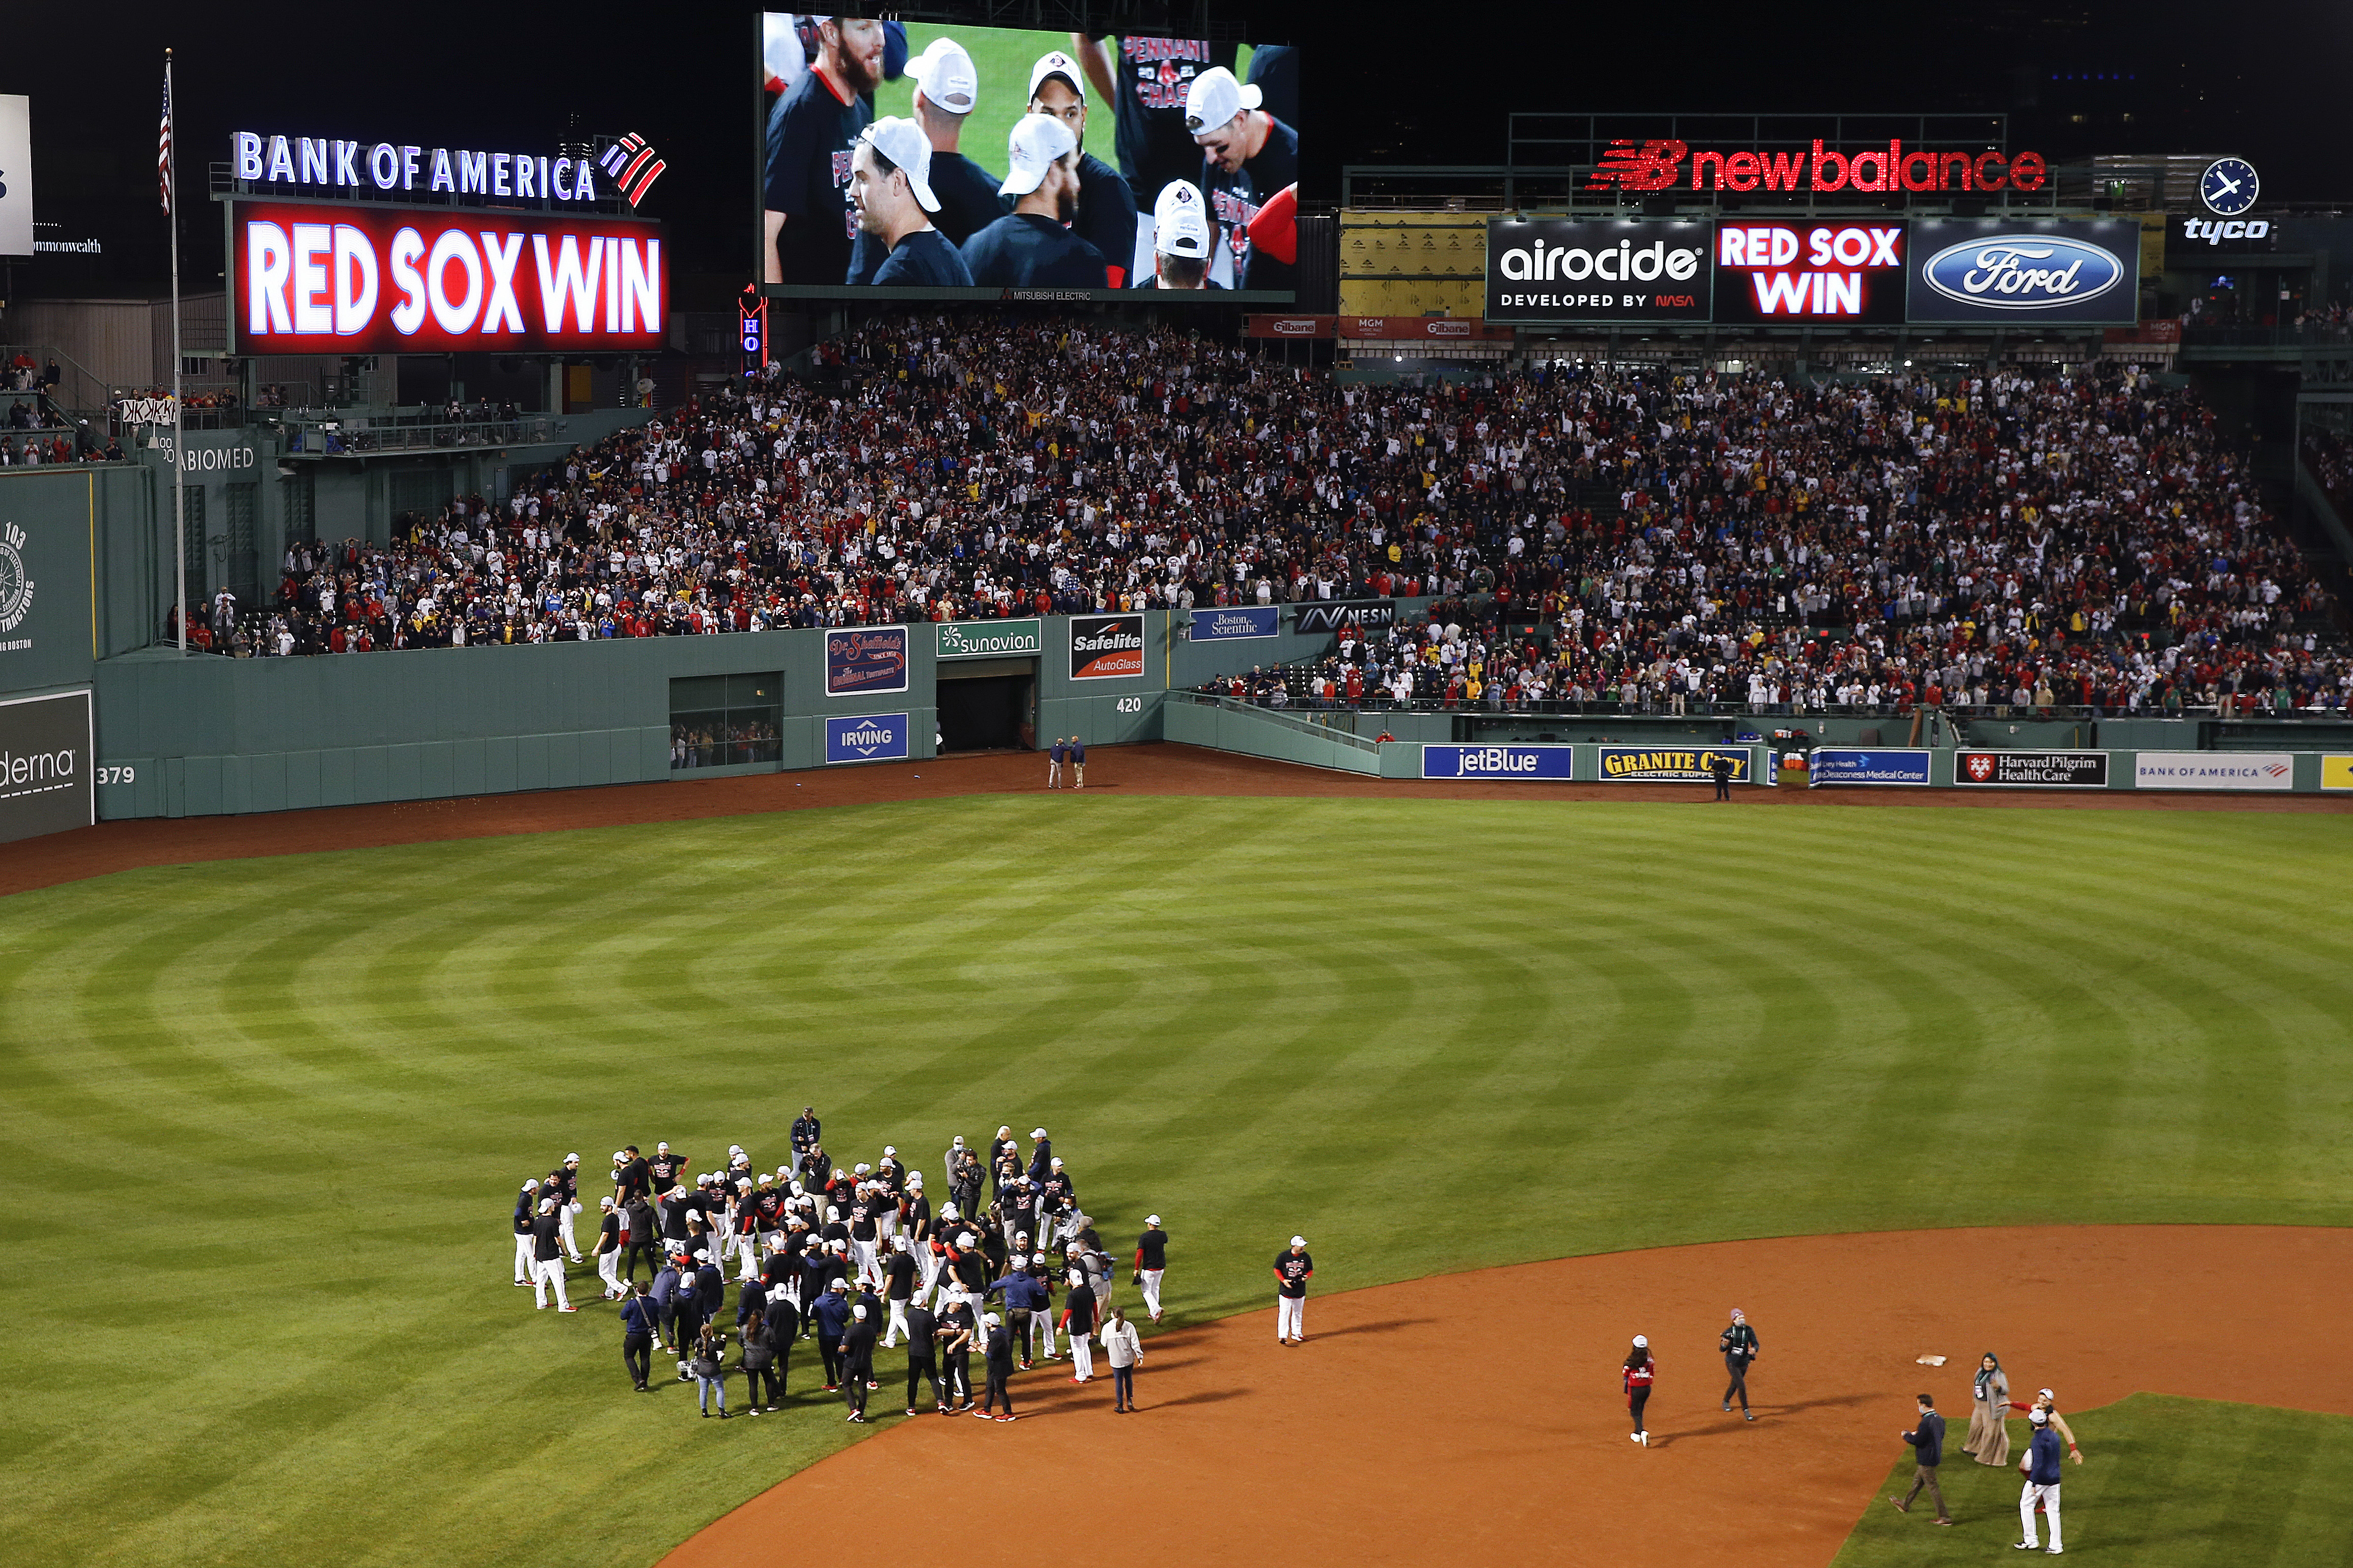 Red Sox News: Fans will be in attendance at Fenway Park in 2021